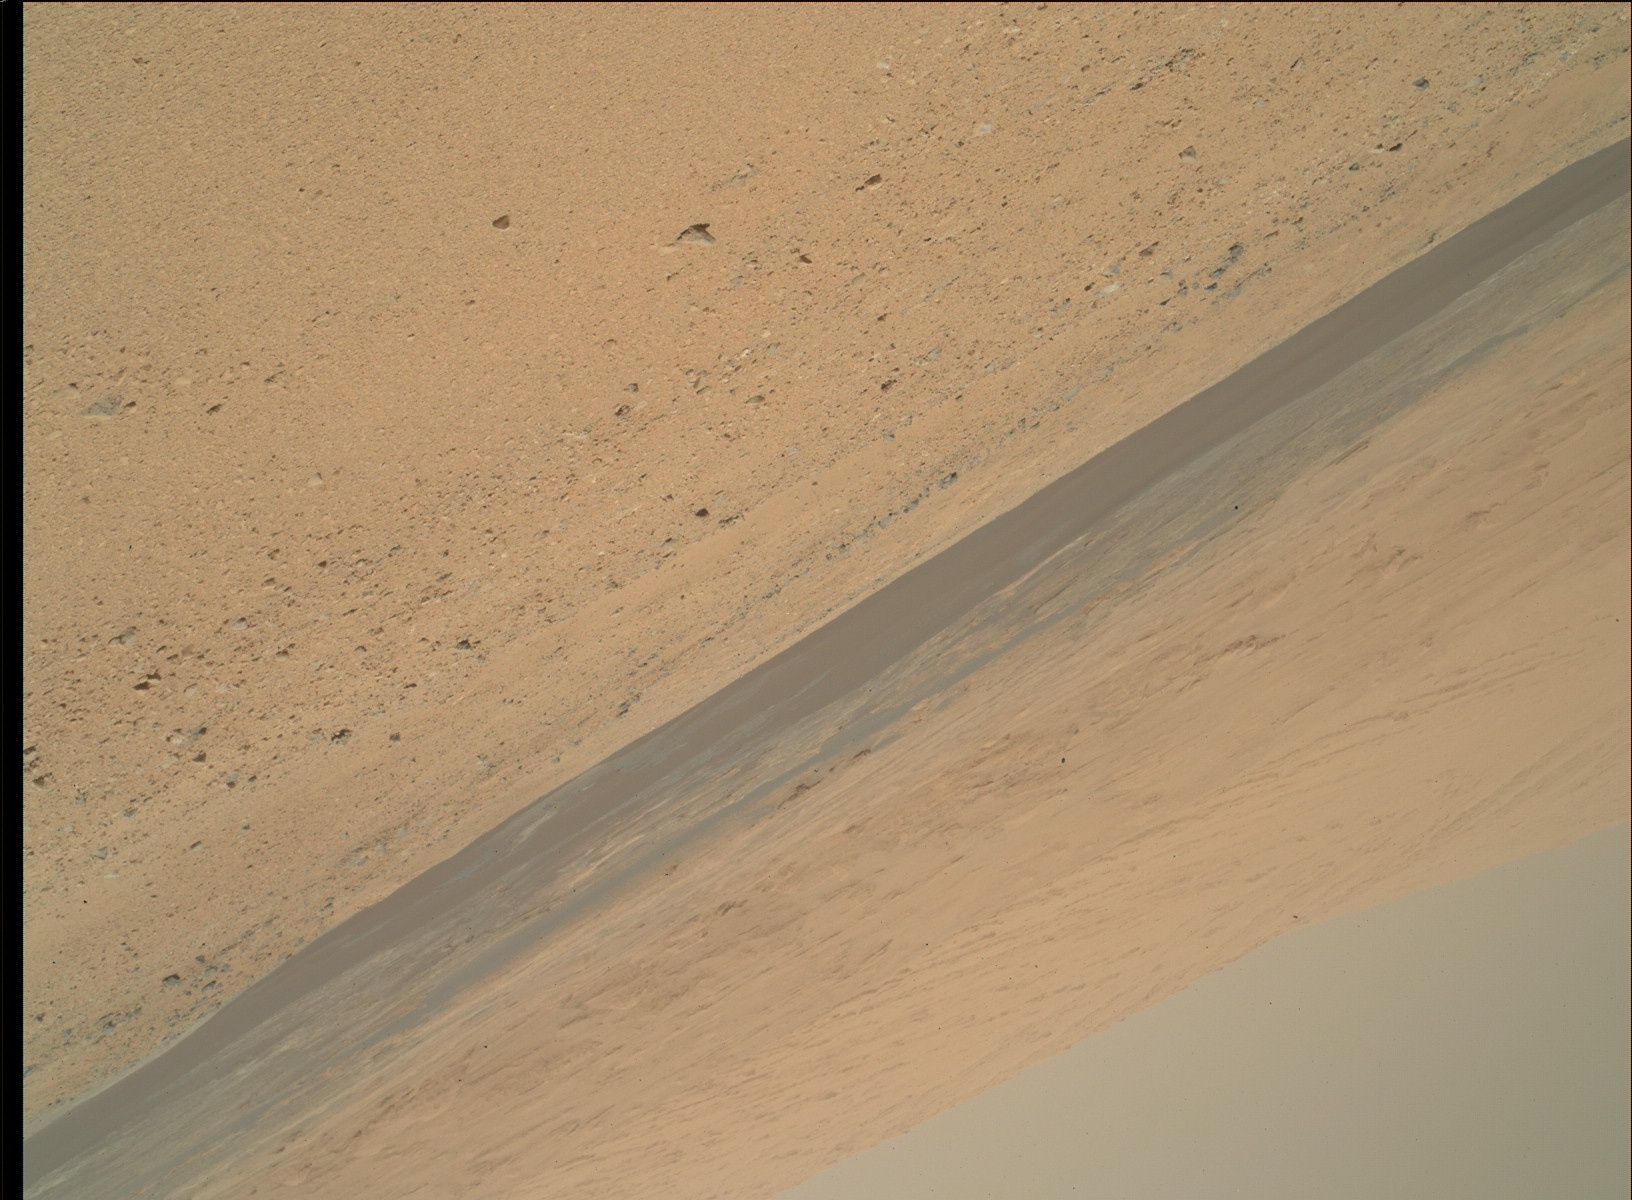 Nasa's Mars rover Curiosity acquired this image using its Mars Hand Lens Imager (MAHLI) on Sol 404